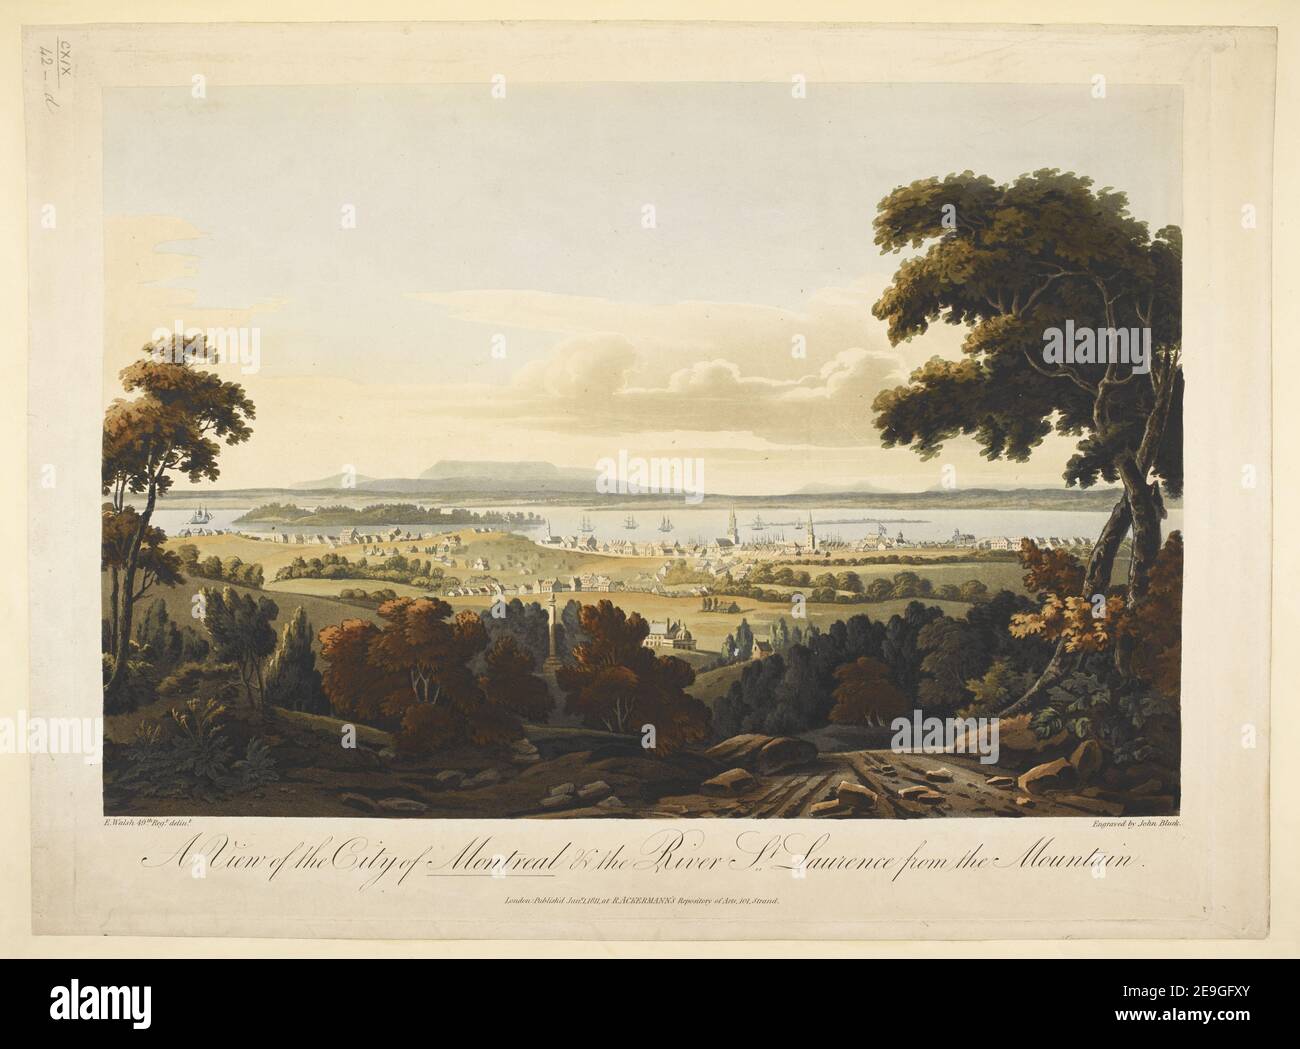 A View of the City of Montreal & the River St Lawrence from the Mountain.  Author  Bluck, John 119.42.d. Place of publication: London Publisher: Publish'd Jany 1 1811, at R. ACKERMANN'S Repository of Arts, 101, Strand., Date of publication: [January 1 1811]  Item type: 1 print Medium: etching and aquatint with hand-colouring Dimensions: platemark 42.8 x 55.2 cm, on sheet 44.2 x 59.9 cm  Former owner: George III, King of Great Britain, 1738-1820 Stock Photo